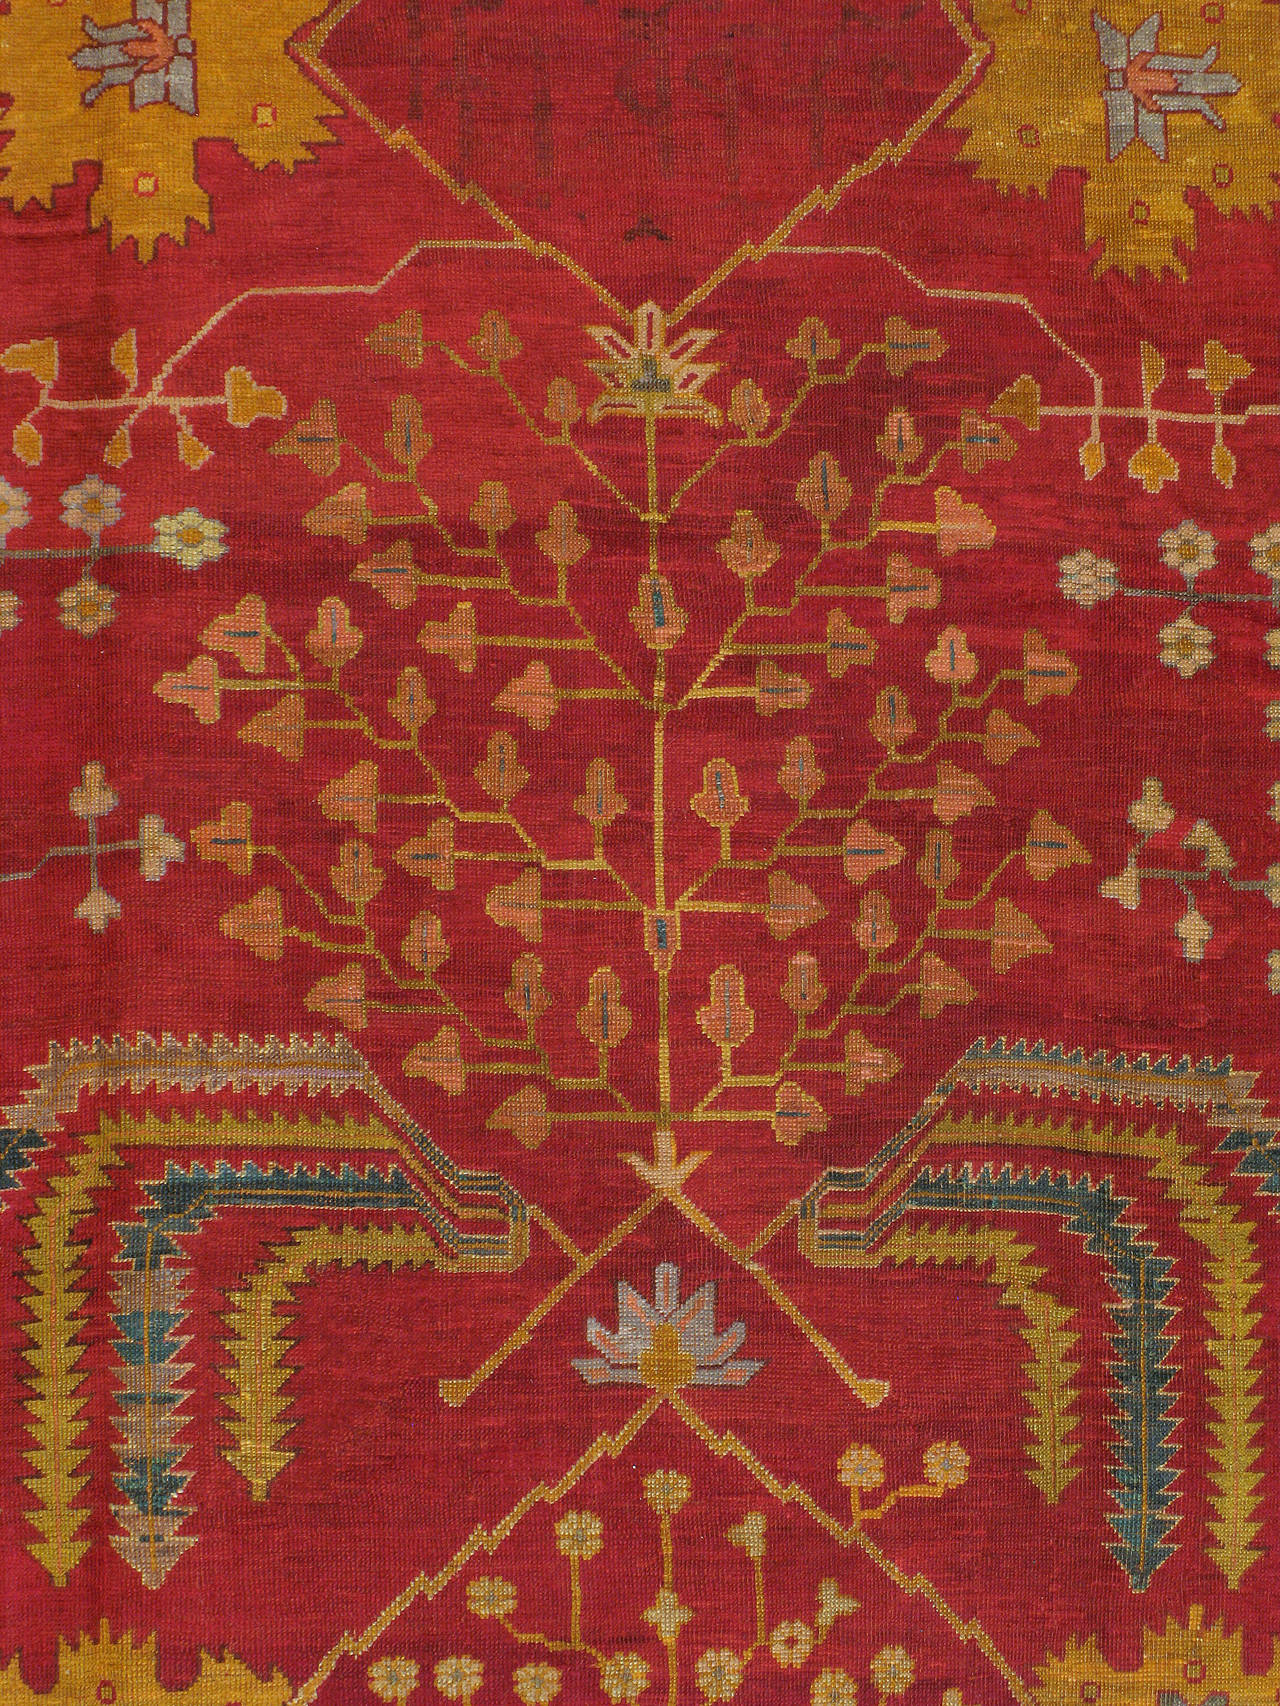 An antique Turkish Oushak carpet from the first quarter of the 20th century. A goldenrod border encompasses a crimson red field.